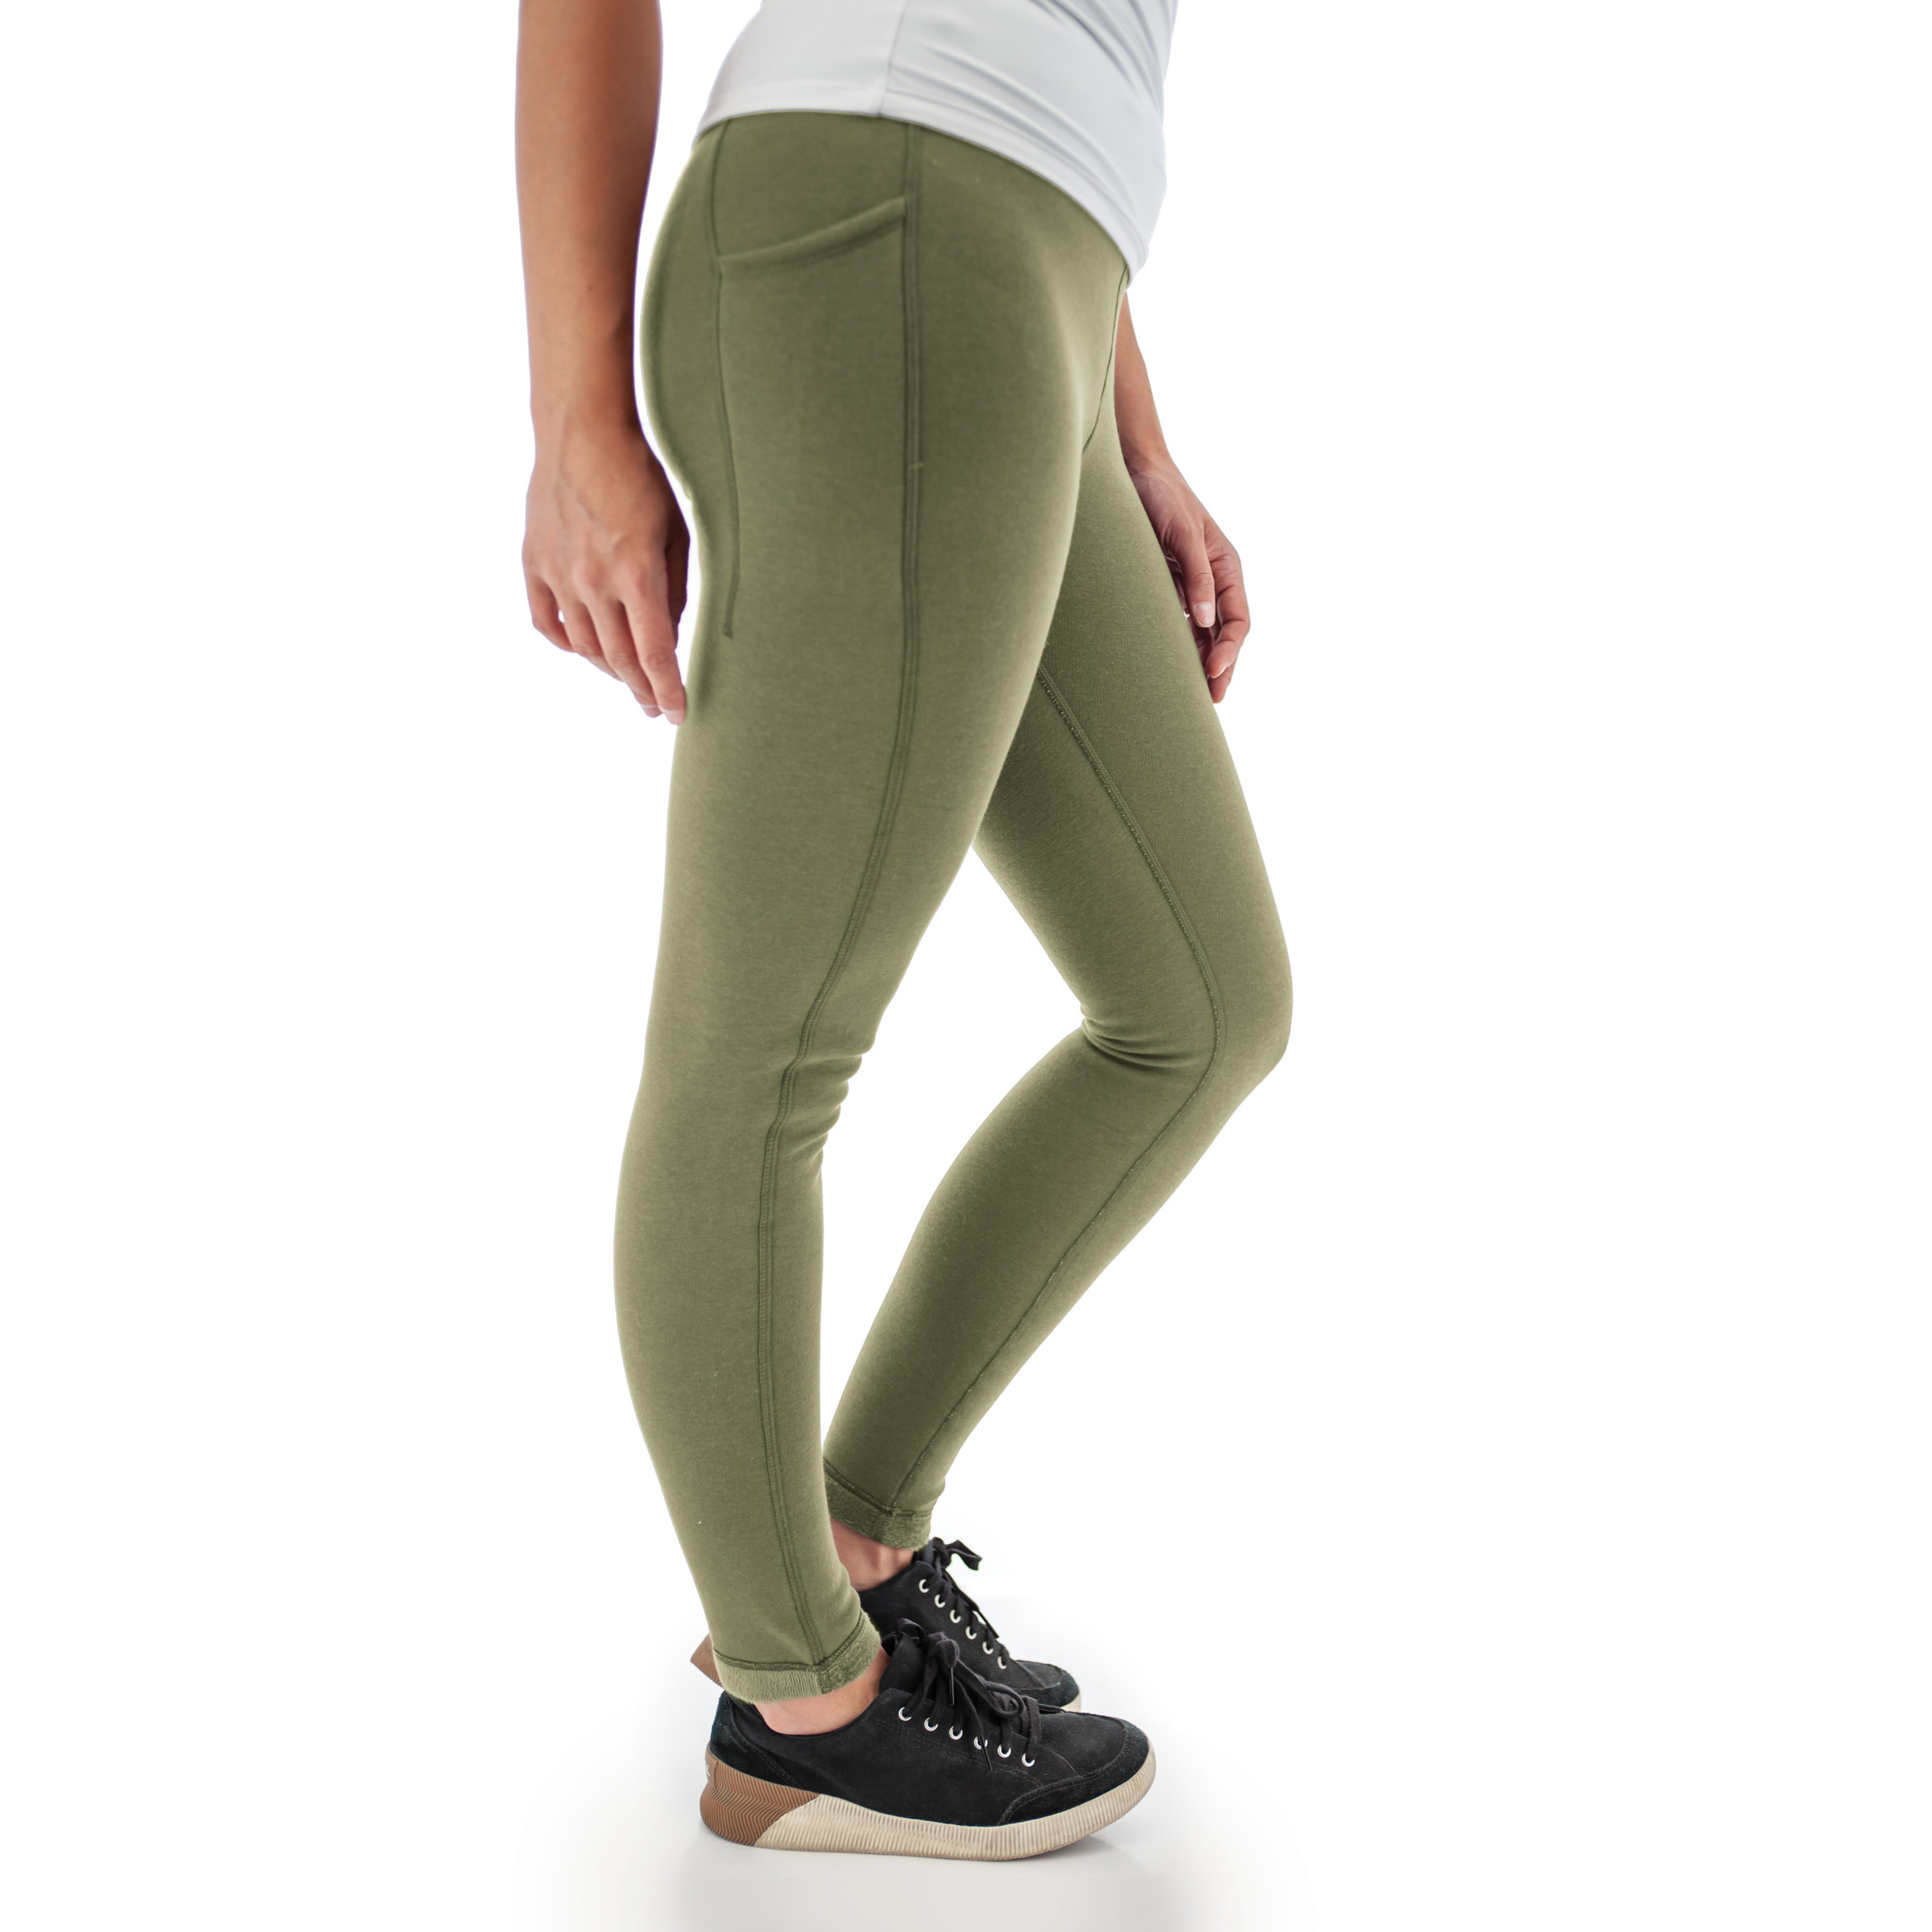 LEGGING 01 OLIVE - Ethica Collection